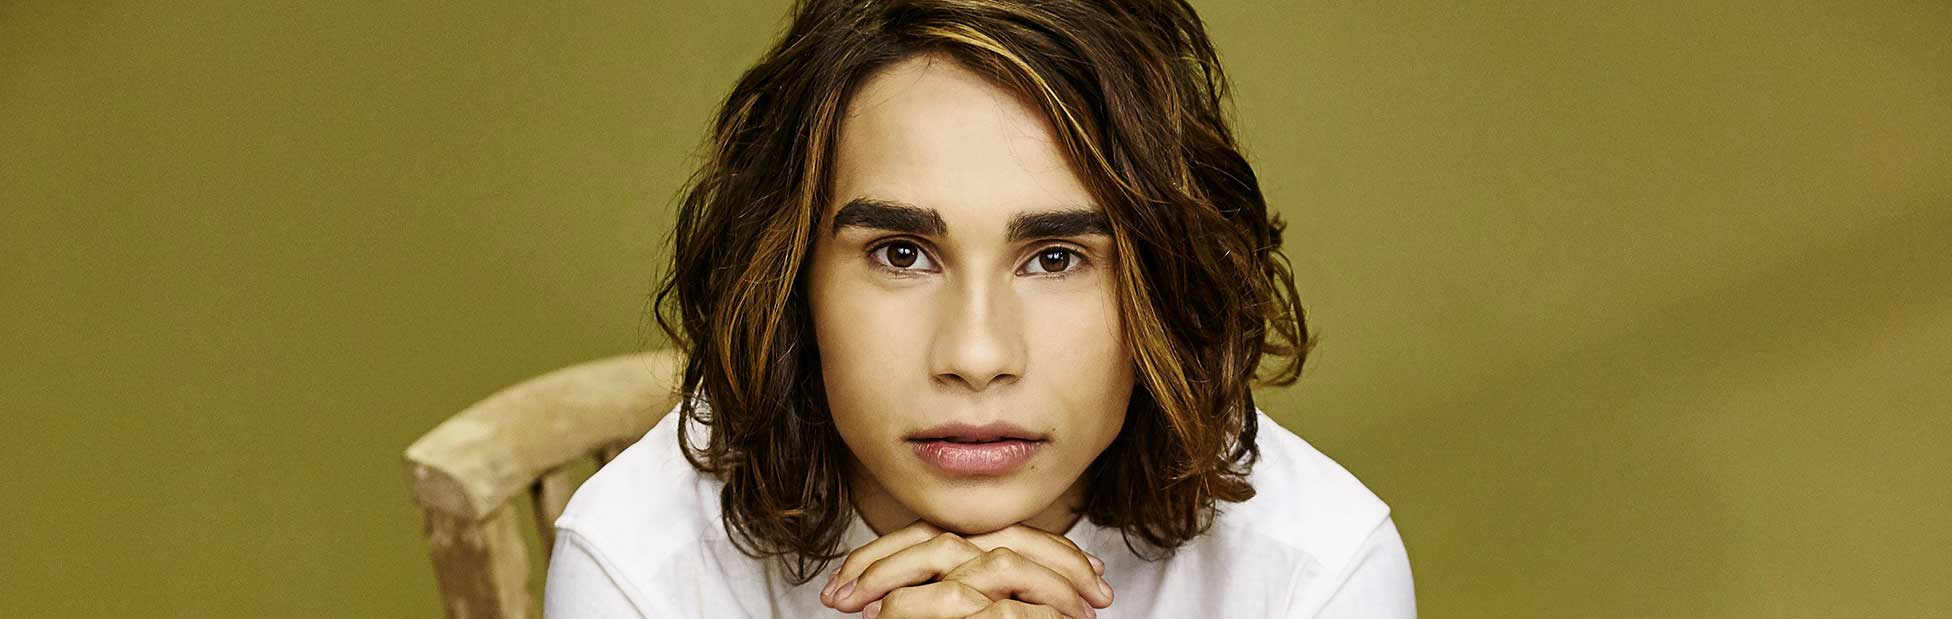 Isaiah Firebrace sitting on chair chin sitting on his hands